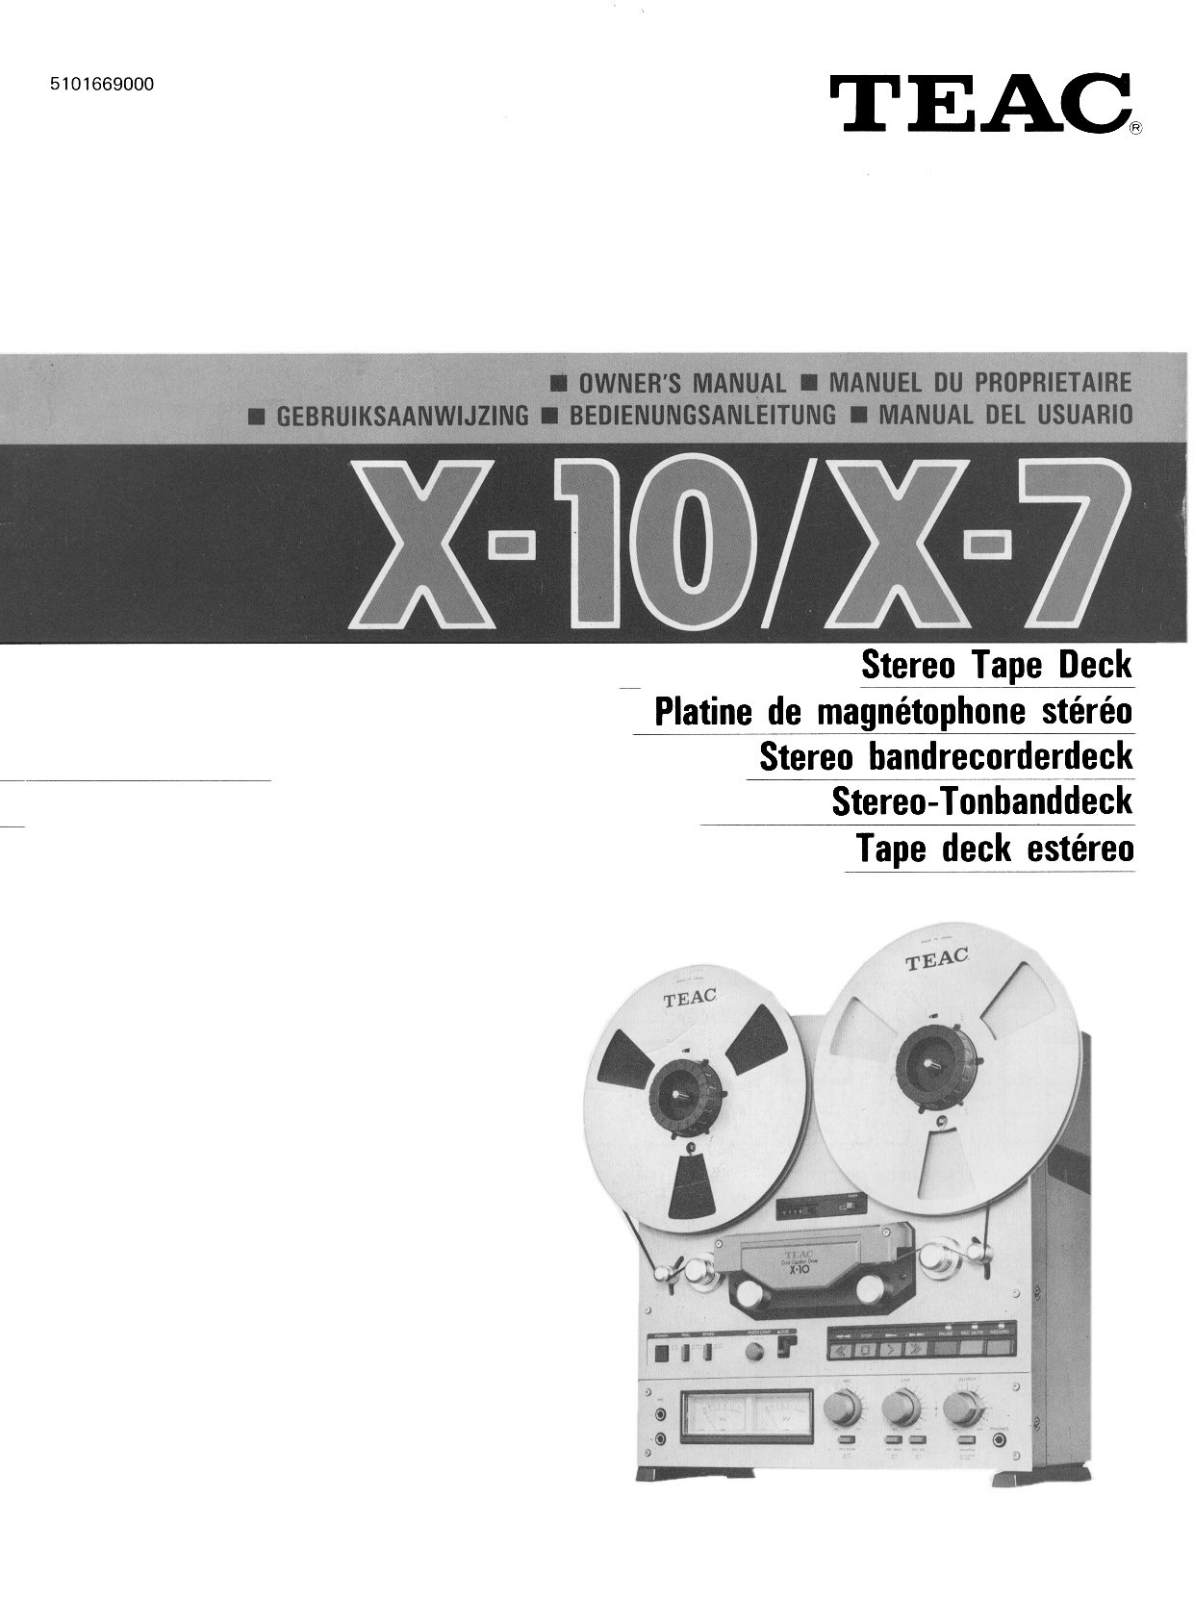 TEAC X-10 Owners manual